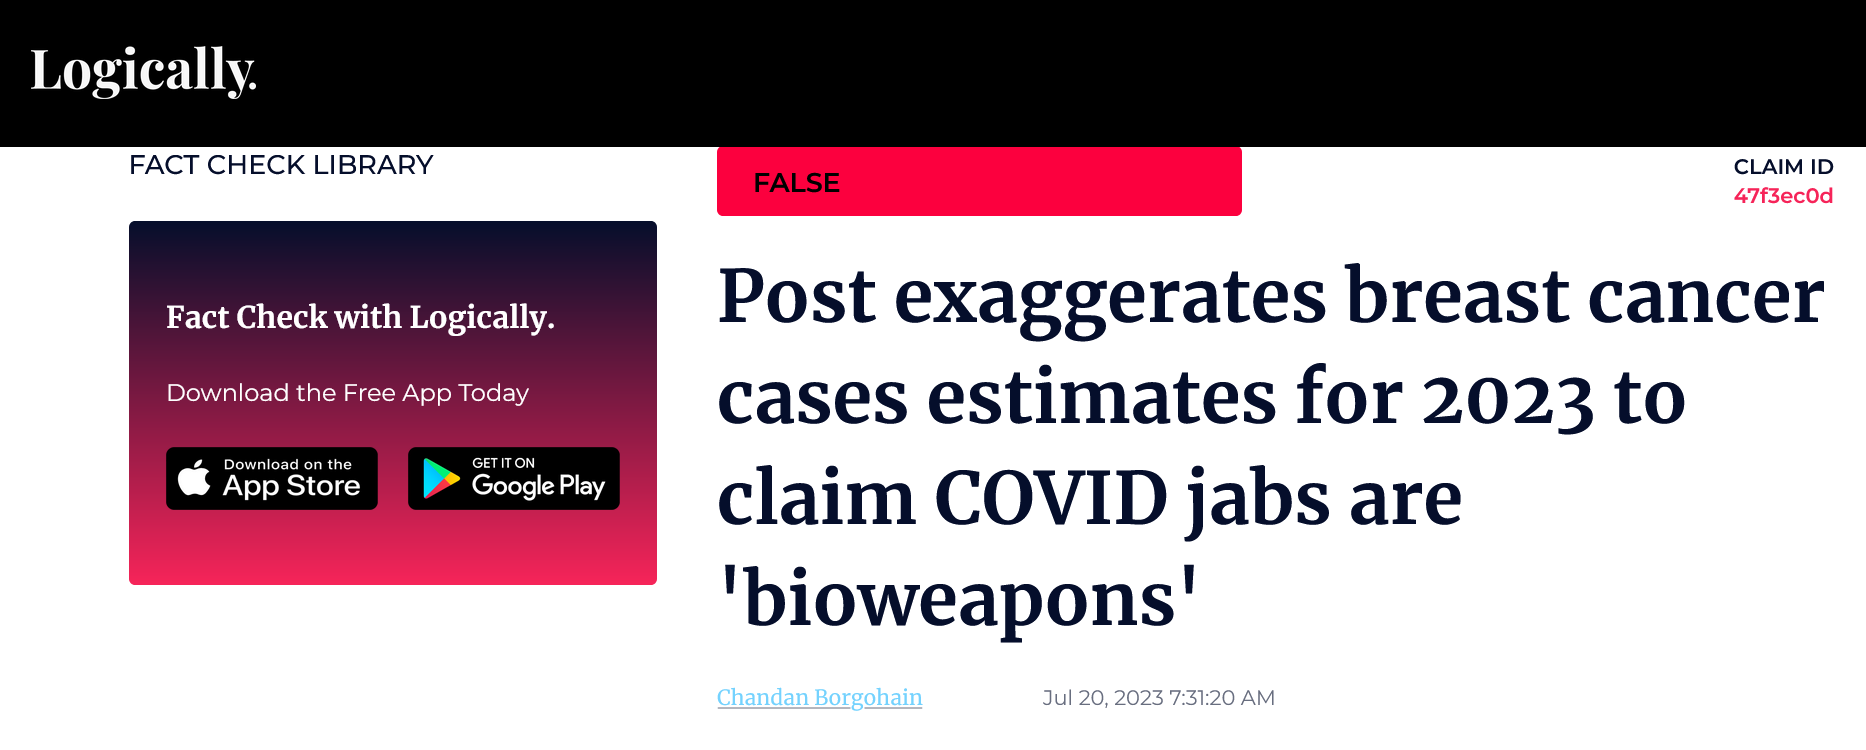 Screenshot 2023 07 24 At 14 26 49 False Post Exaggerates Breast Cancer Cases Estimates For 2023 To Claim Covid Jabs Are Bioweapons